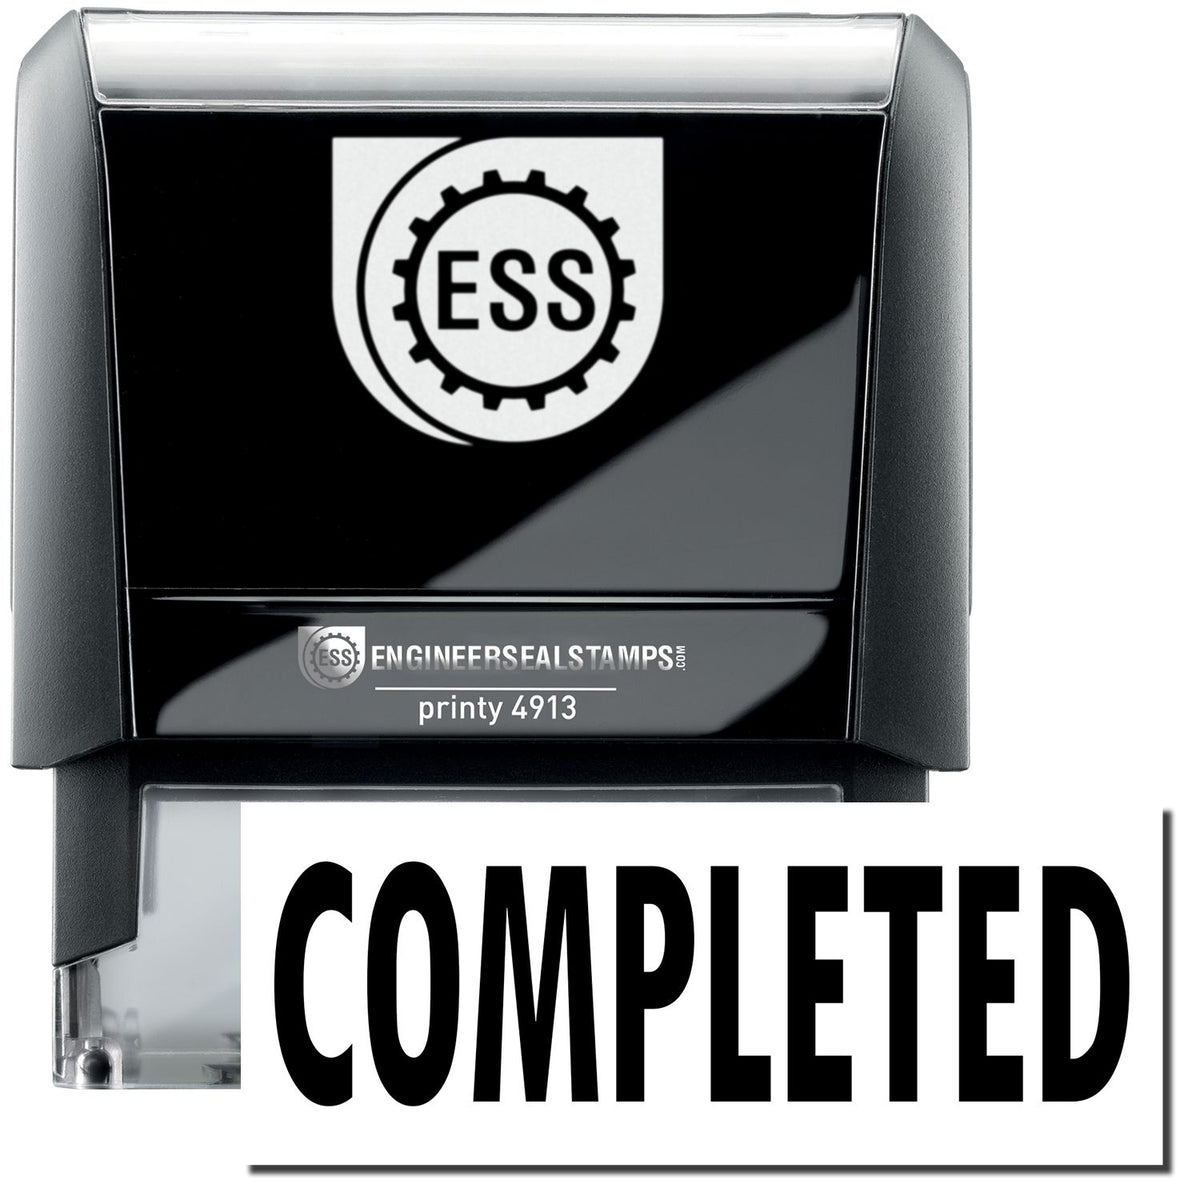 A large self-inking stamp with a stamped image showing how the text &quot;COMPLETED&quot; in a large bold font is displayed by it.